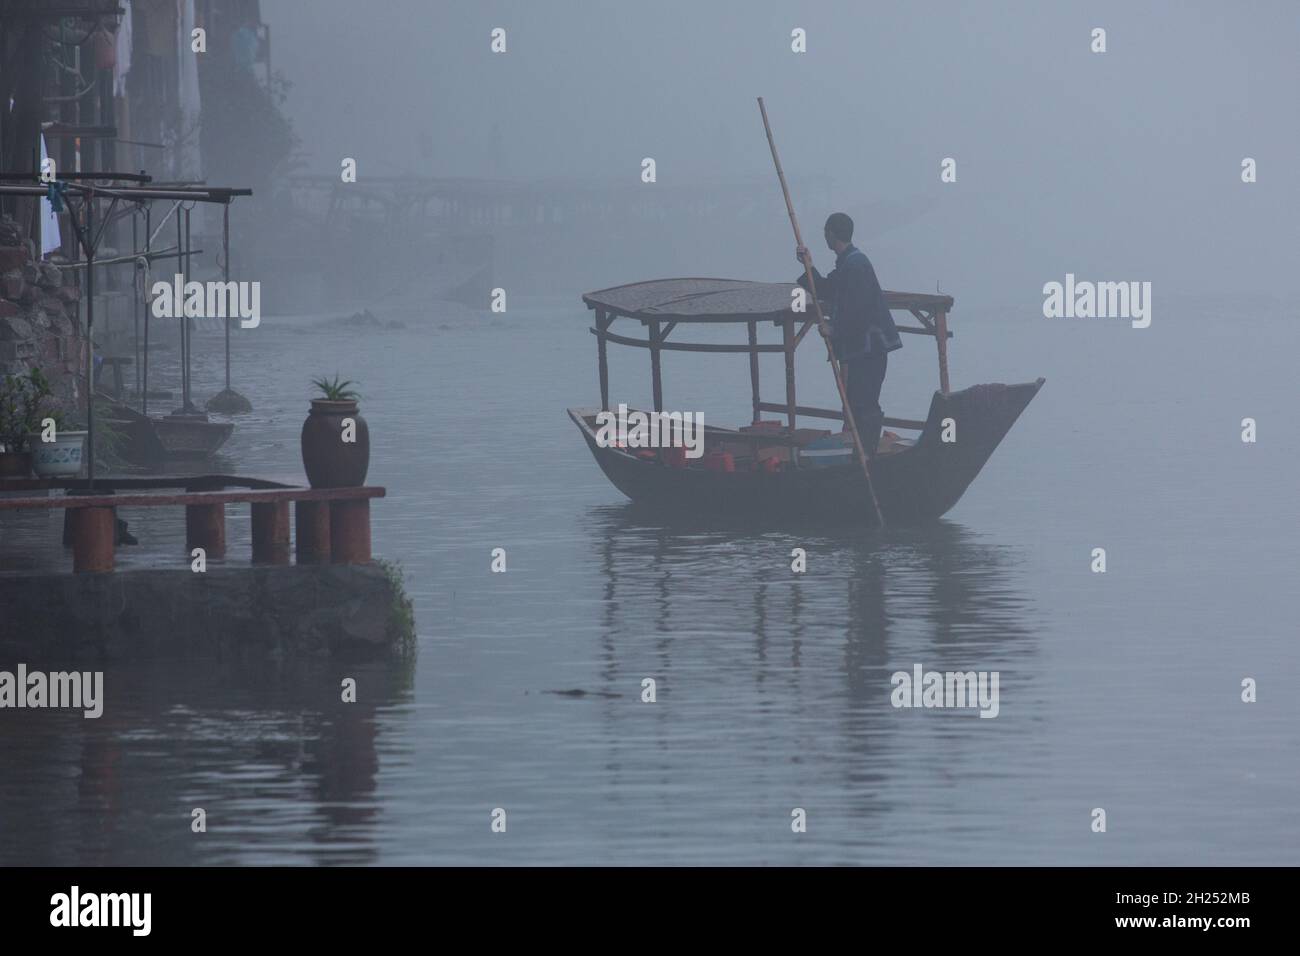 A man poles an empty covered tour boat up the Tuojiang River in early-morning fog.  Fenghuang, China. Stock Photo